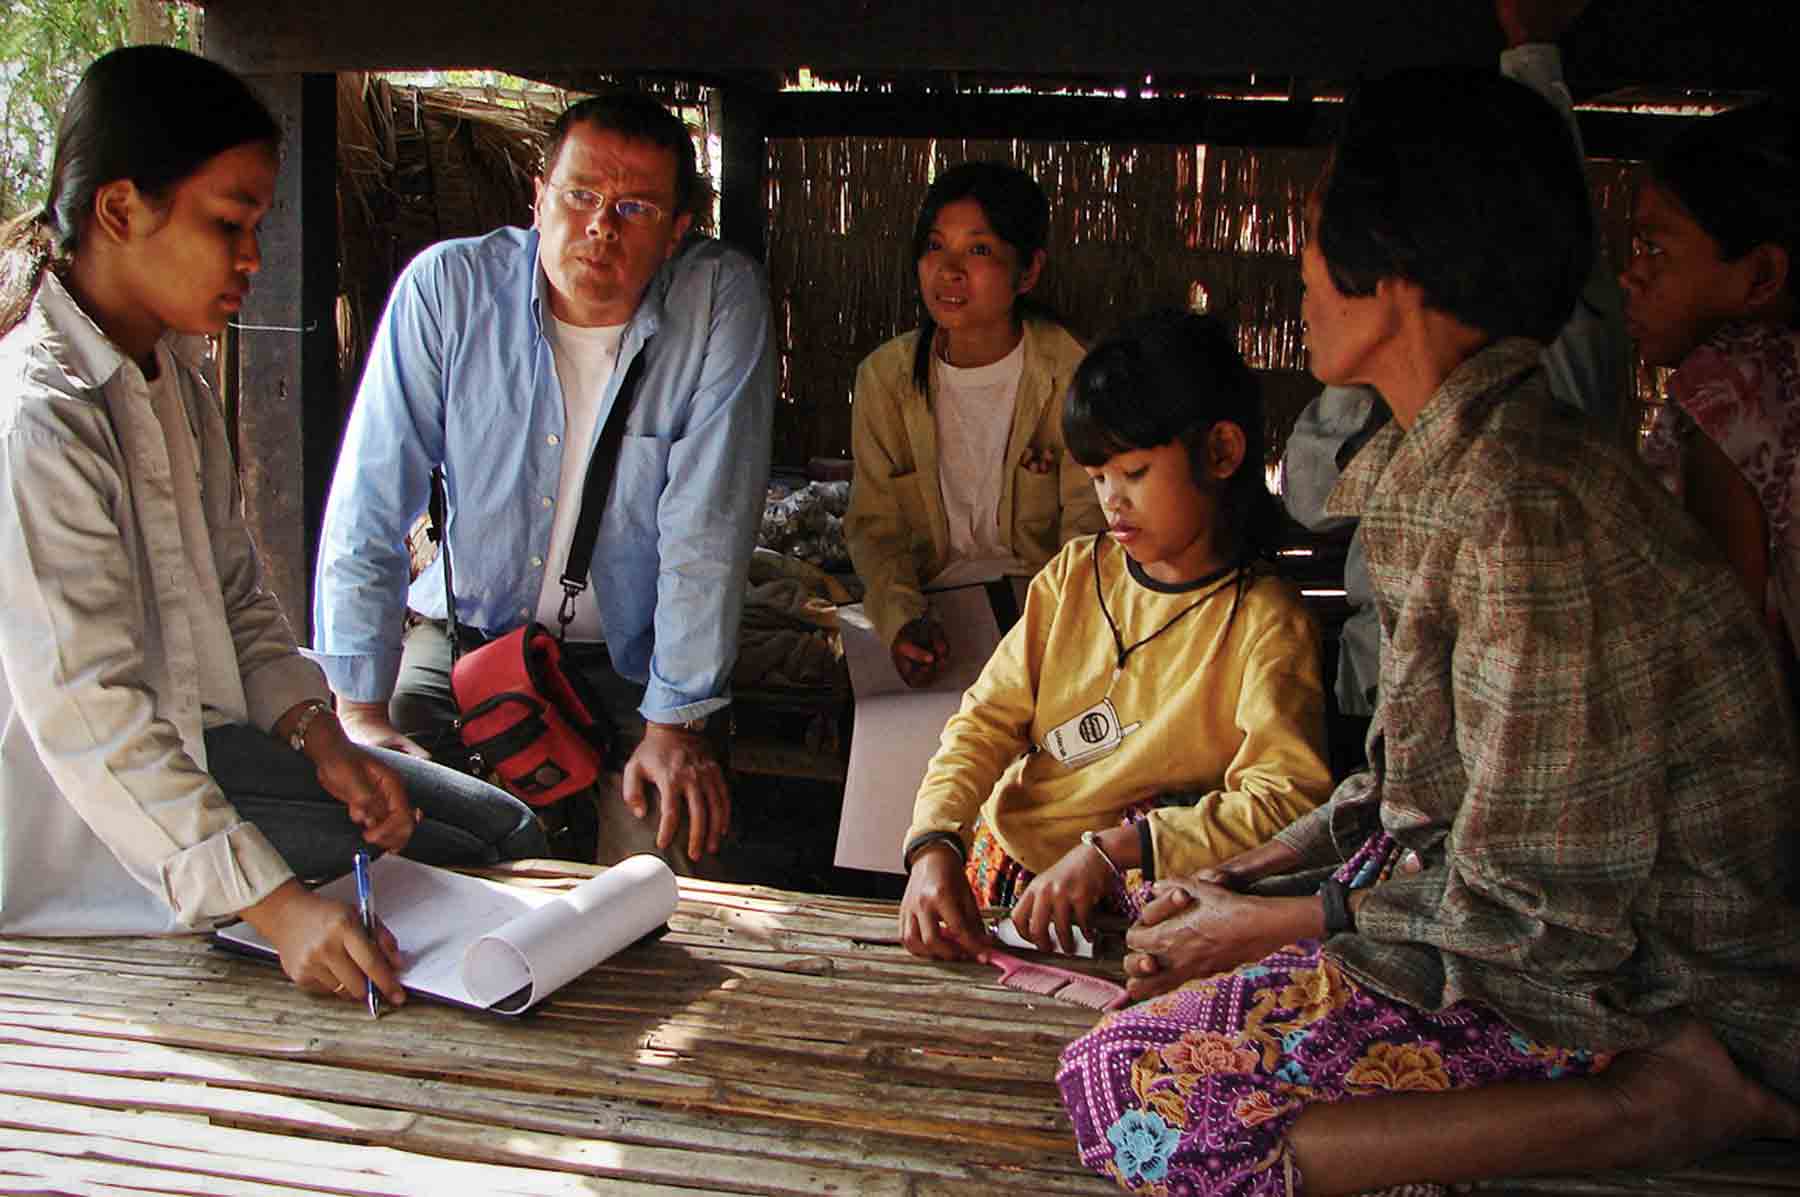 Localisation and humanitarian intervention in a village in Cambodia for poor children suffering from ill-treatment, sexual abuse or abandoned by their parents and entrusted to people from the village.